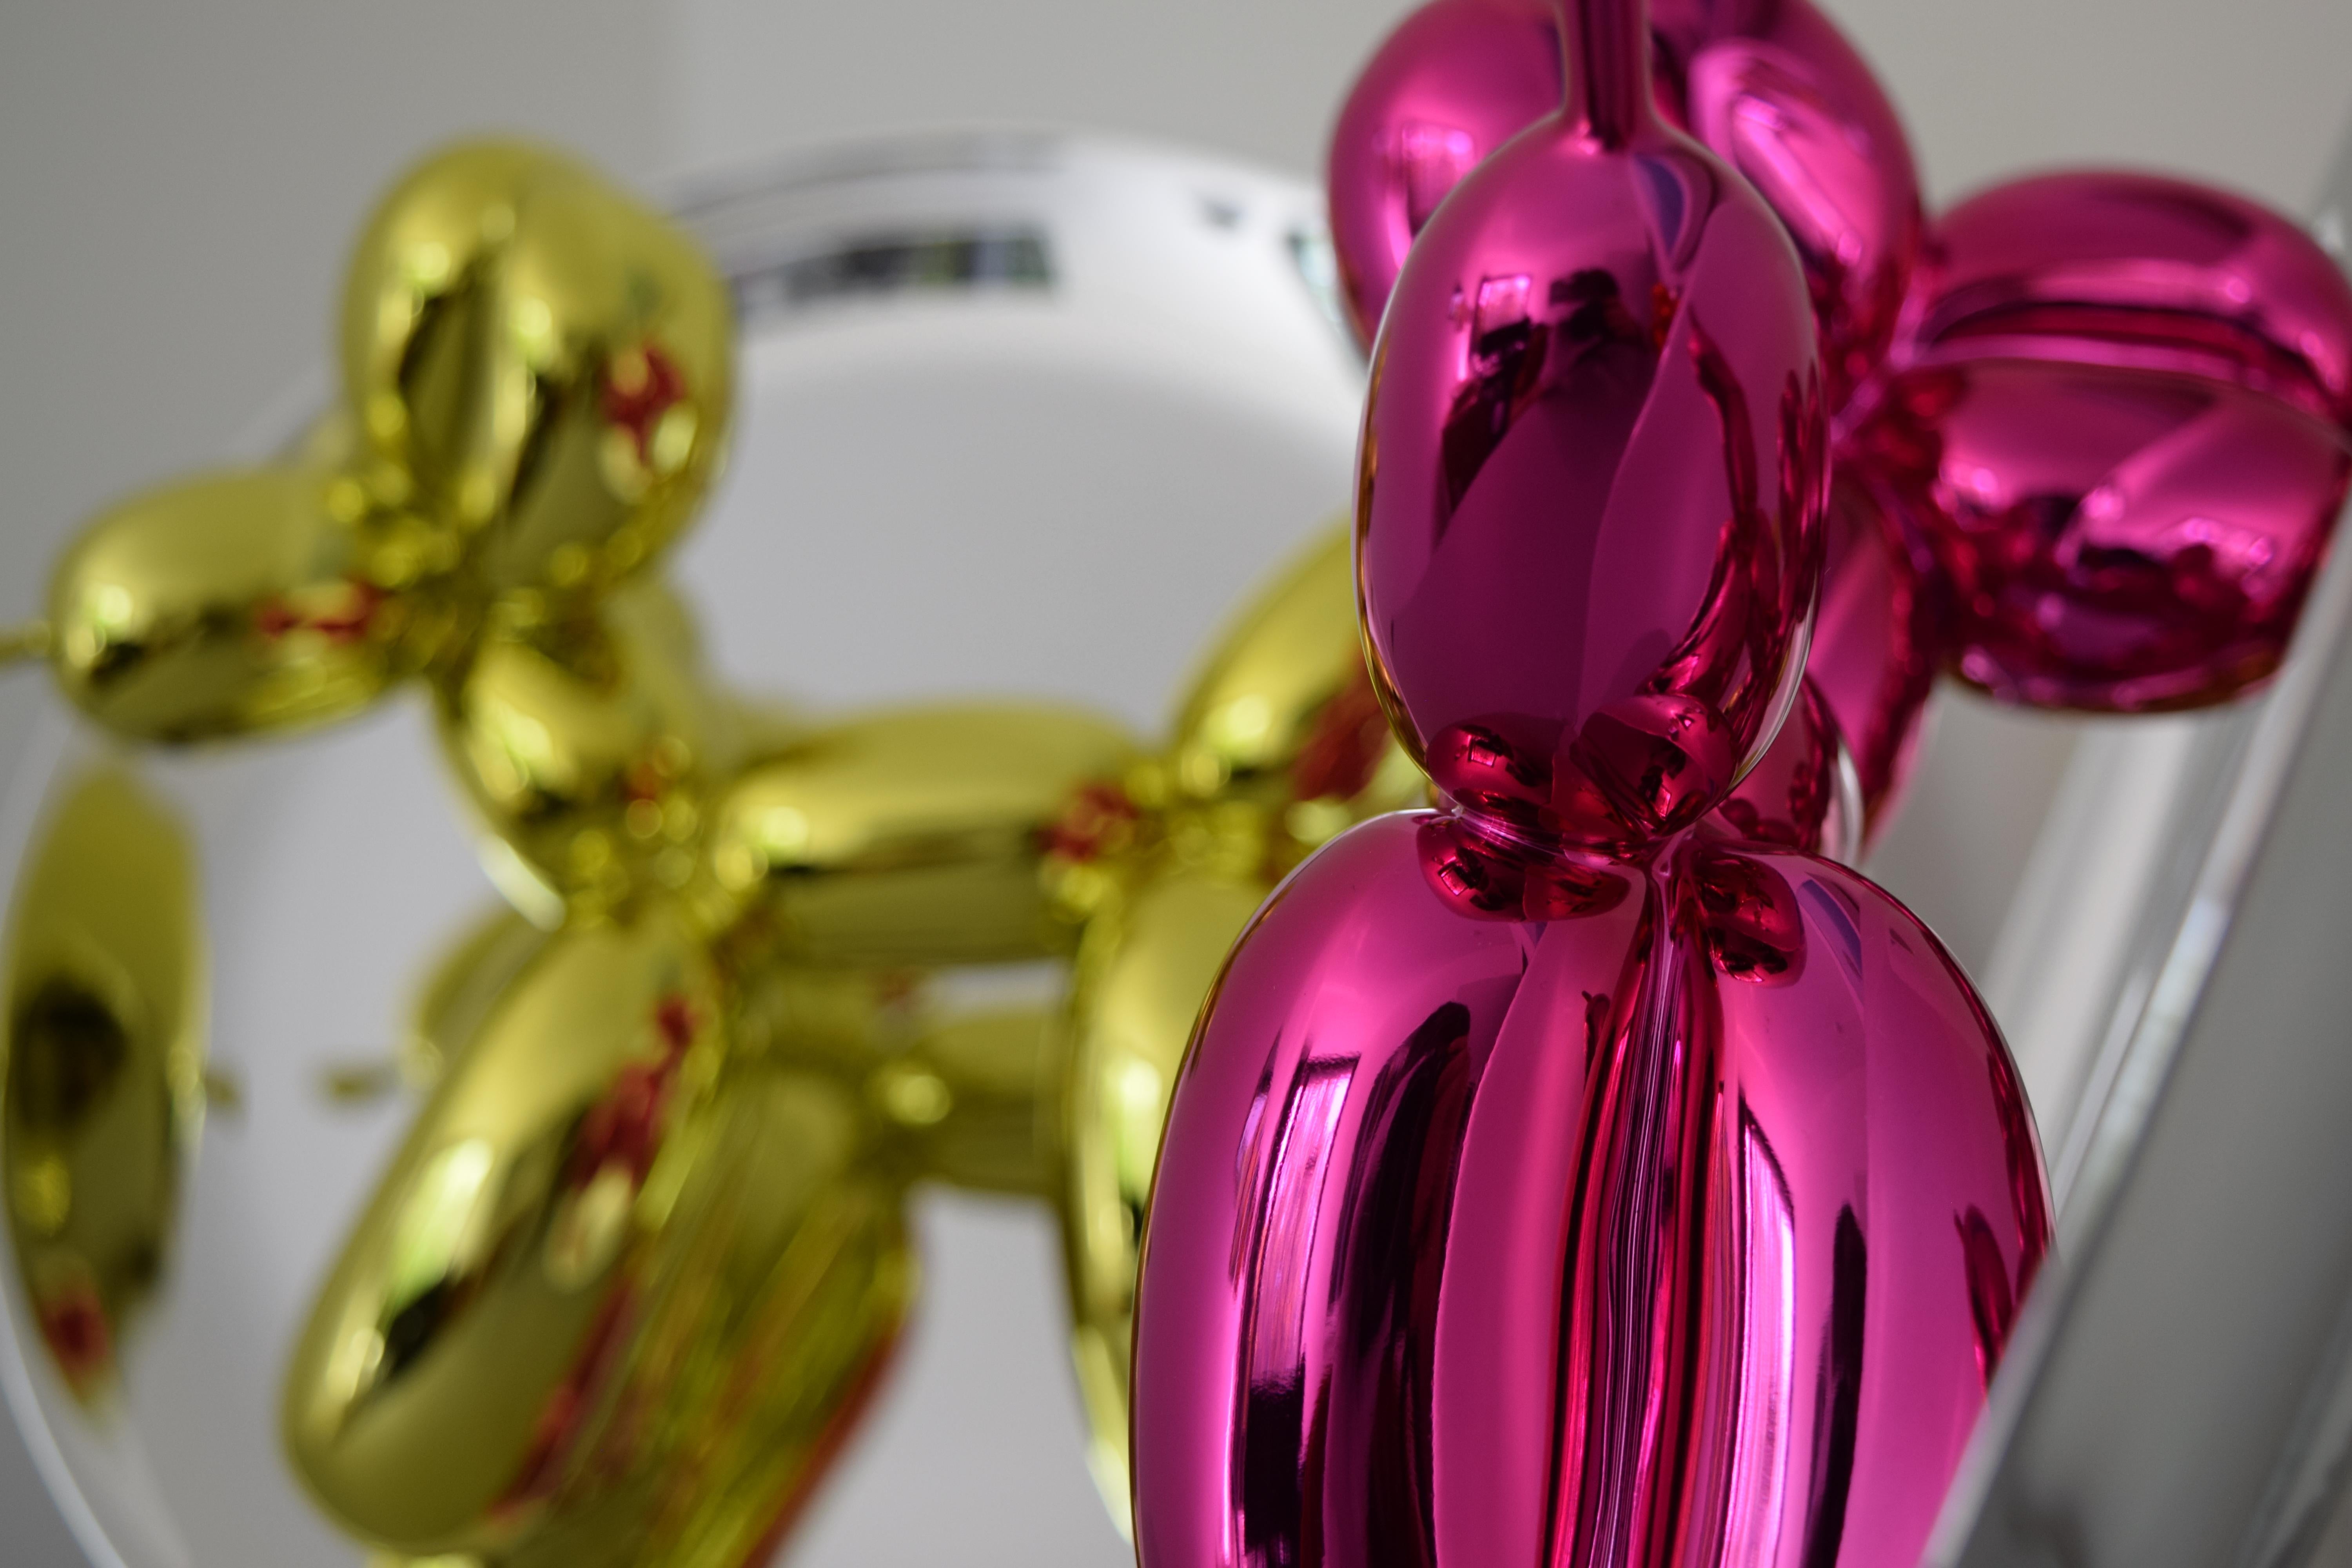 Magenta Balloon Dog Iconic Sculpture by Jeff Koons, Porcelain, Contemporary Art For Sale 17